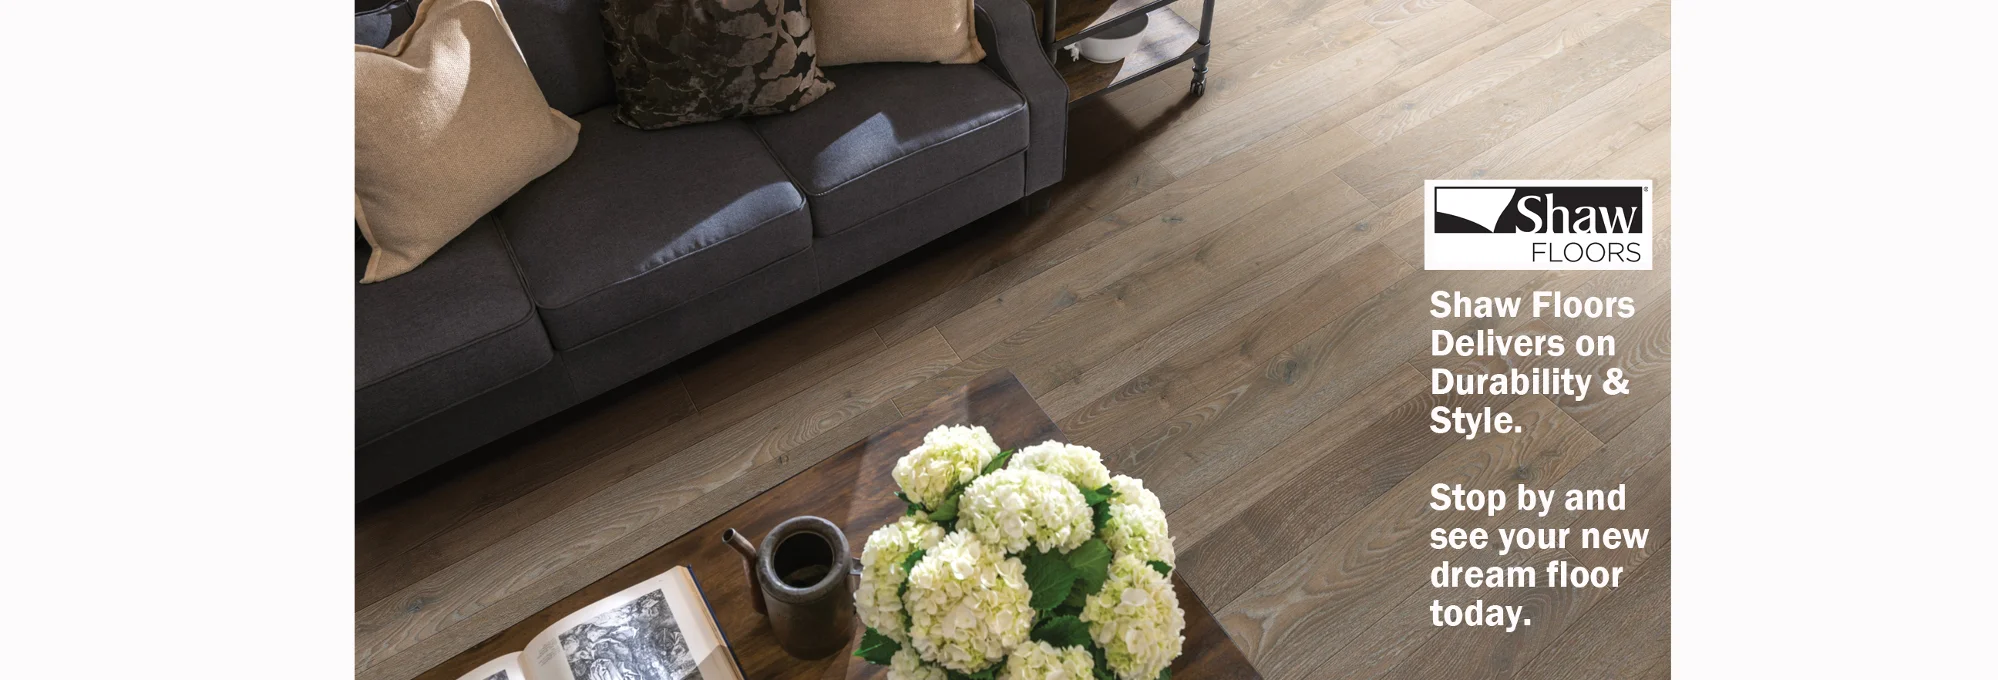 Table with Flowers On Shaw Floors